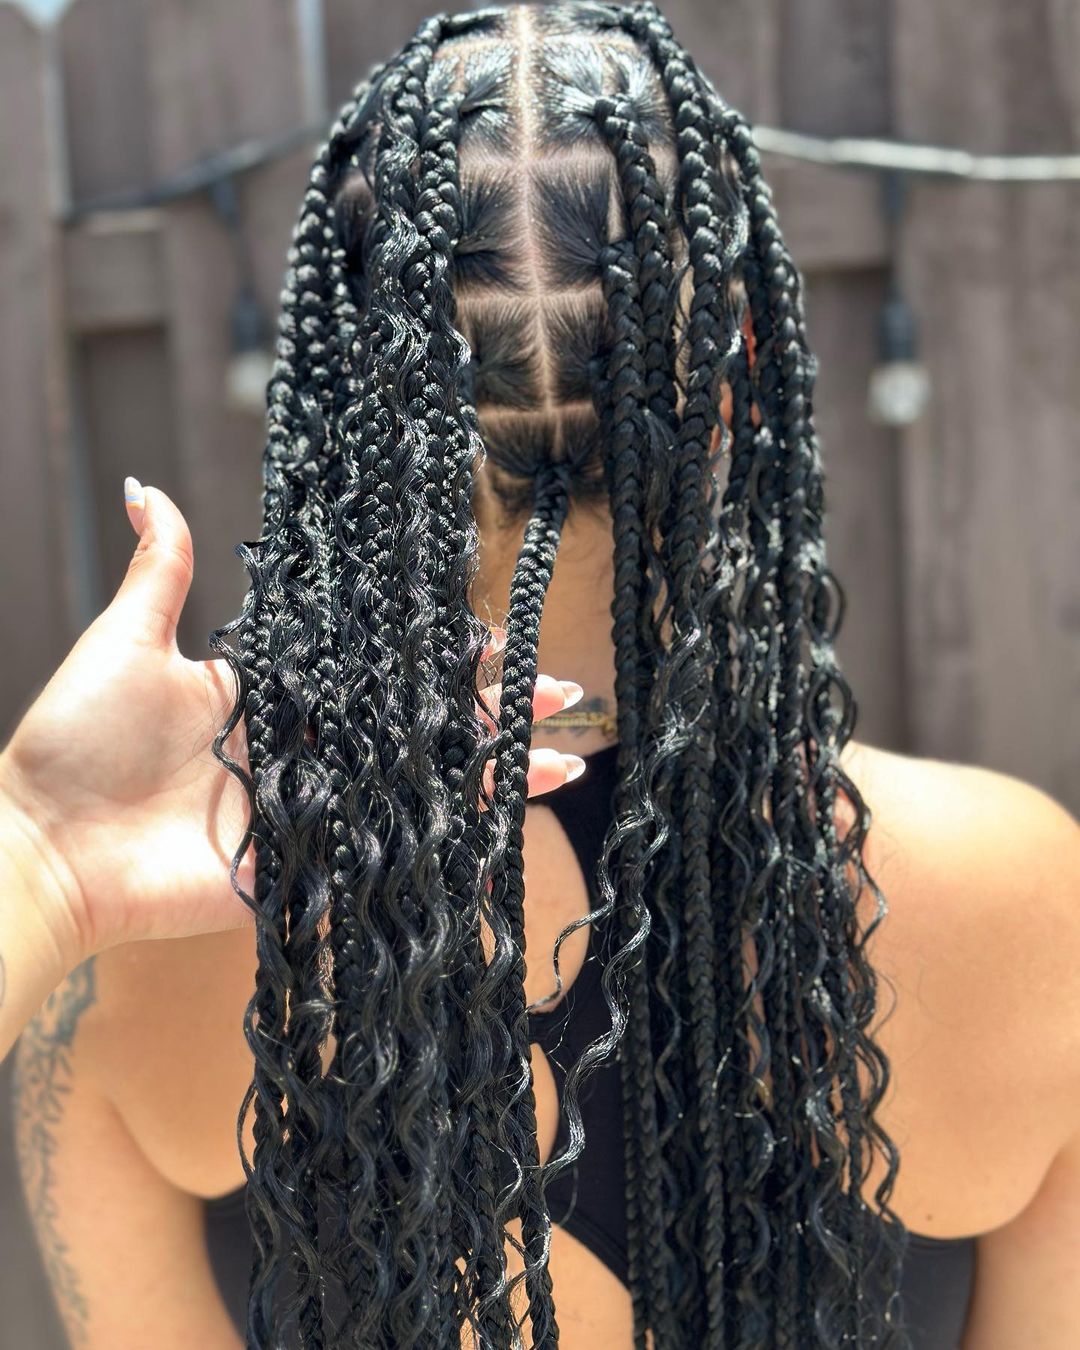 14. Scanty Knotless Braids With Boho Curls